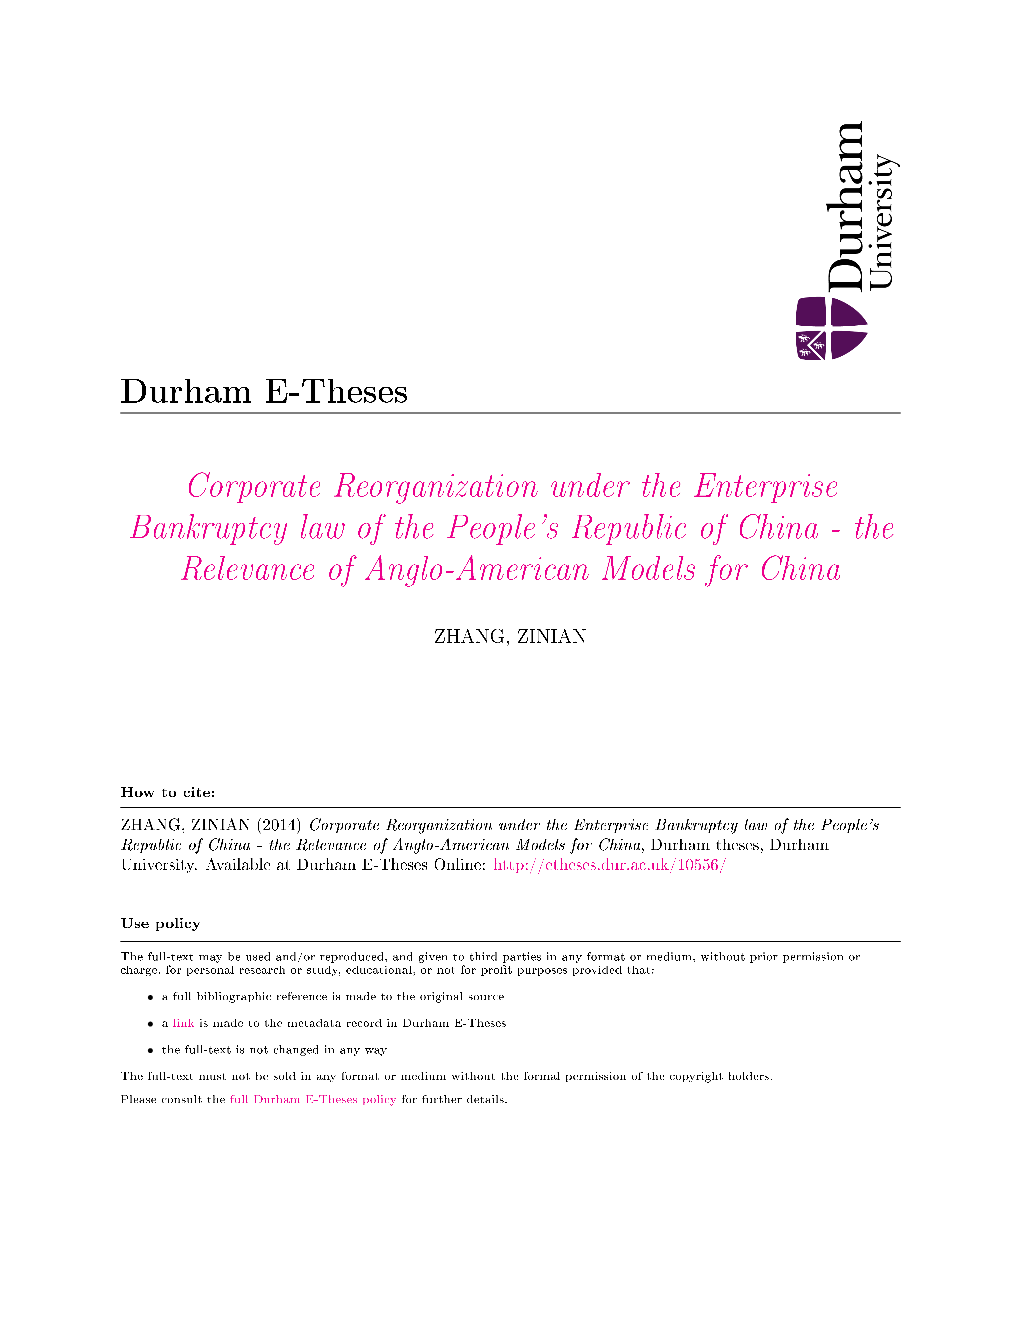 Corporate Reorganization Under the Enterprise Bankruptcy Law of the People's Republic of China - the Relevance of Anglo-American Models for China